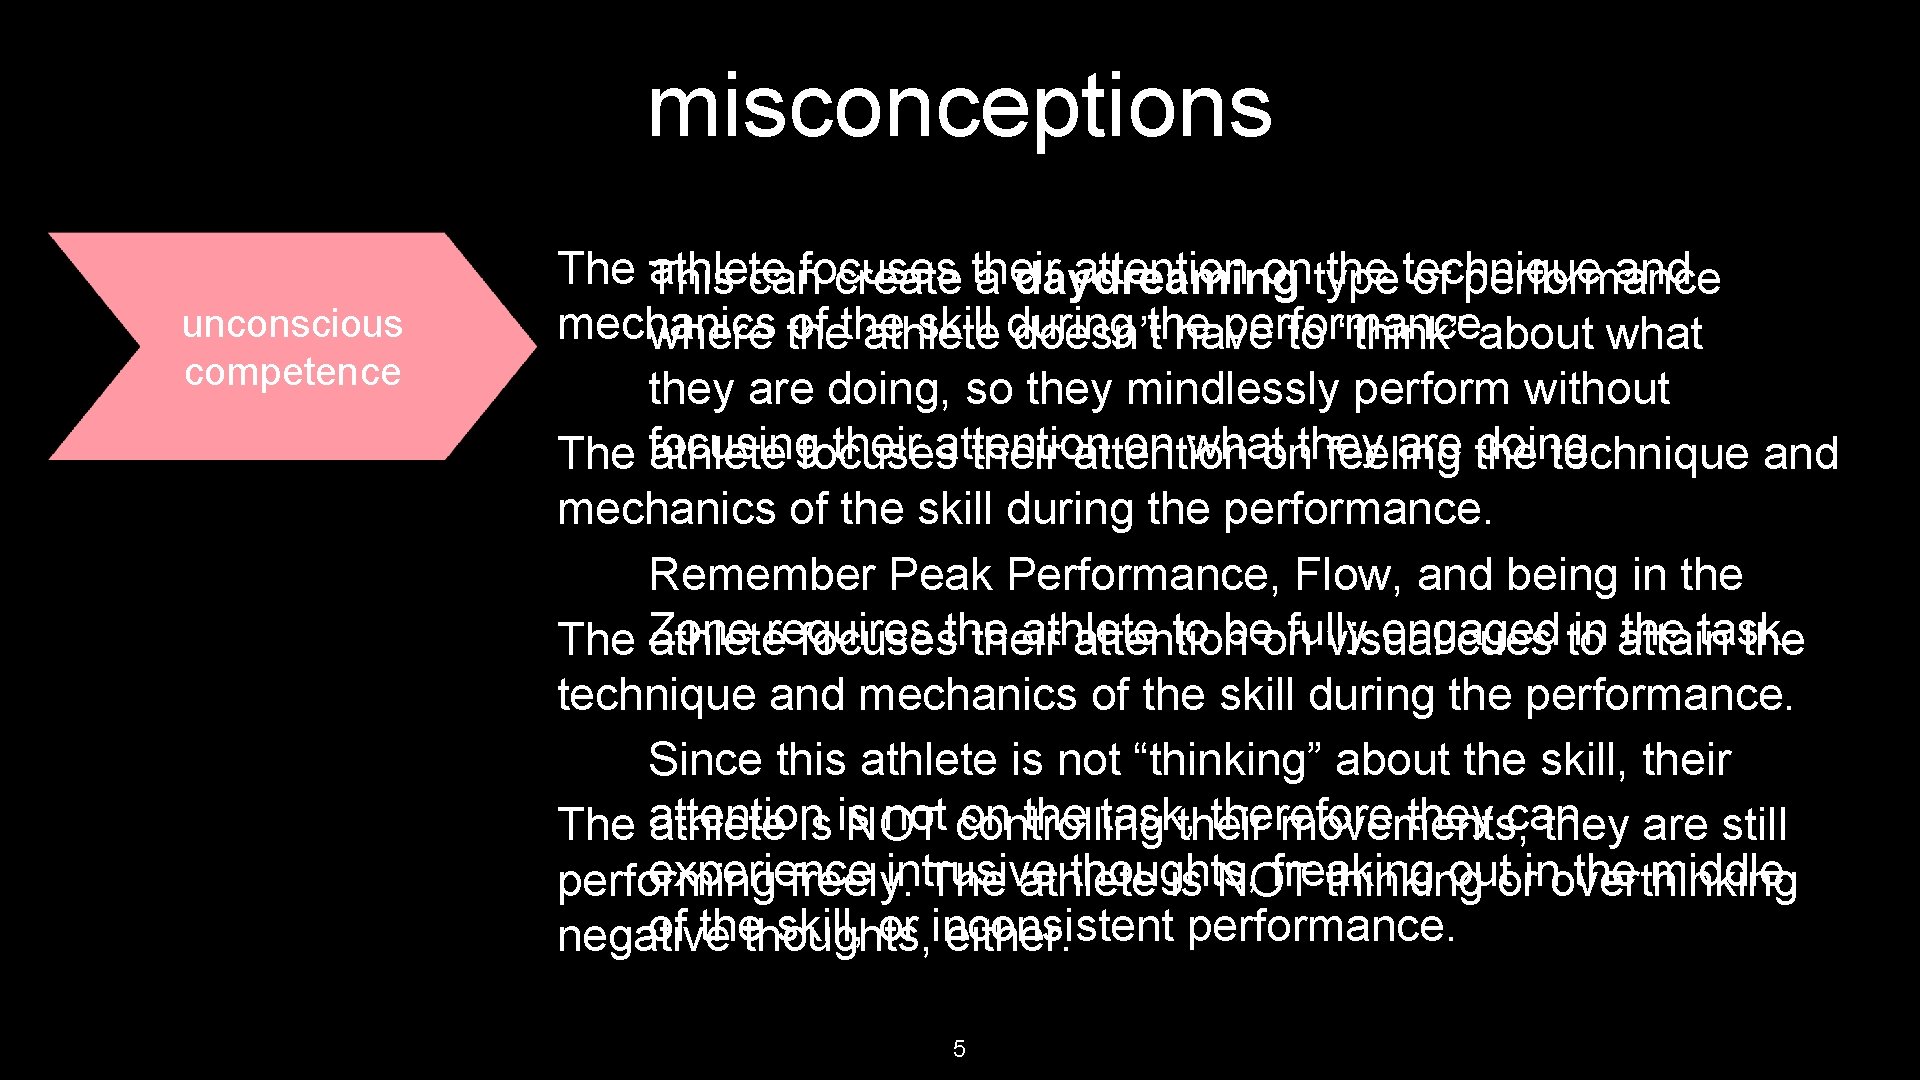 misconceptions conscious unconscious competence This athlete attention ontype the technique and canfocuses create their